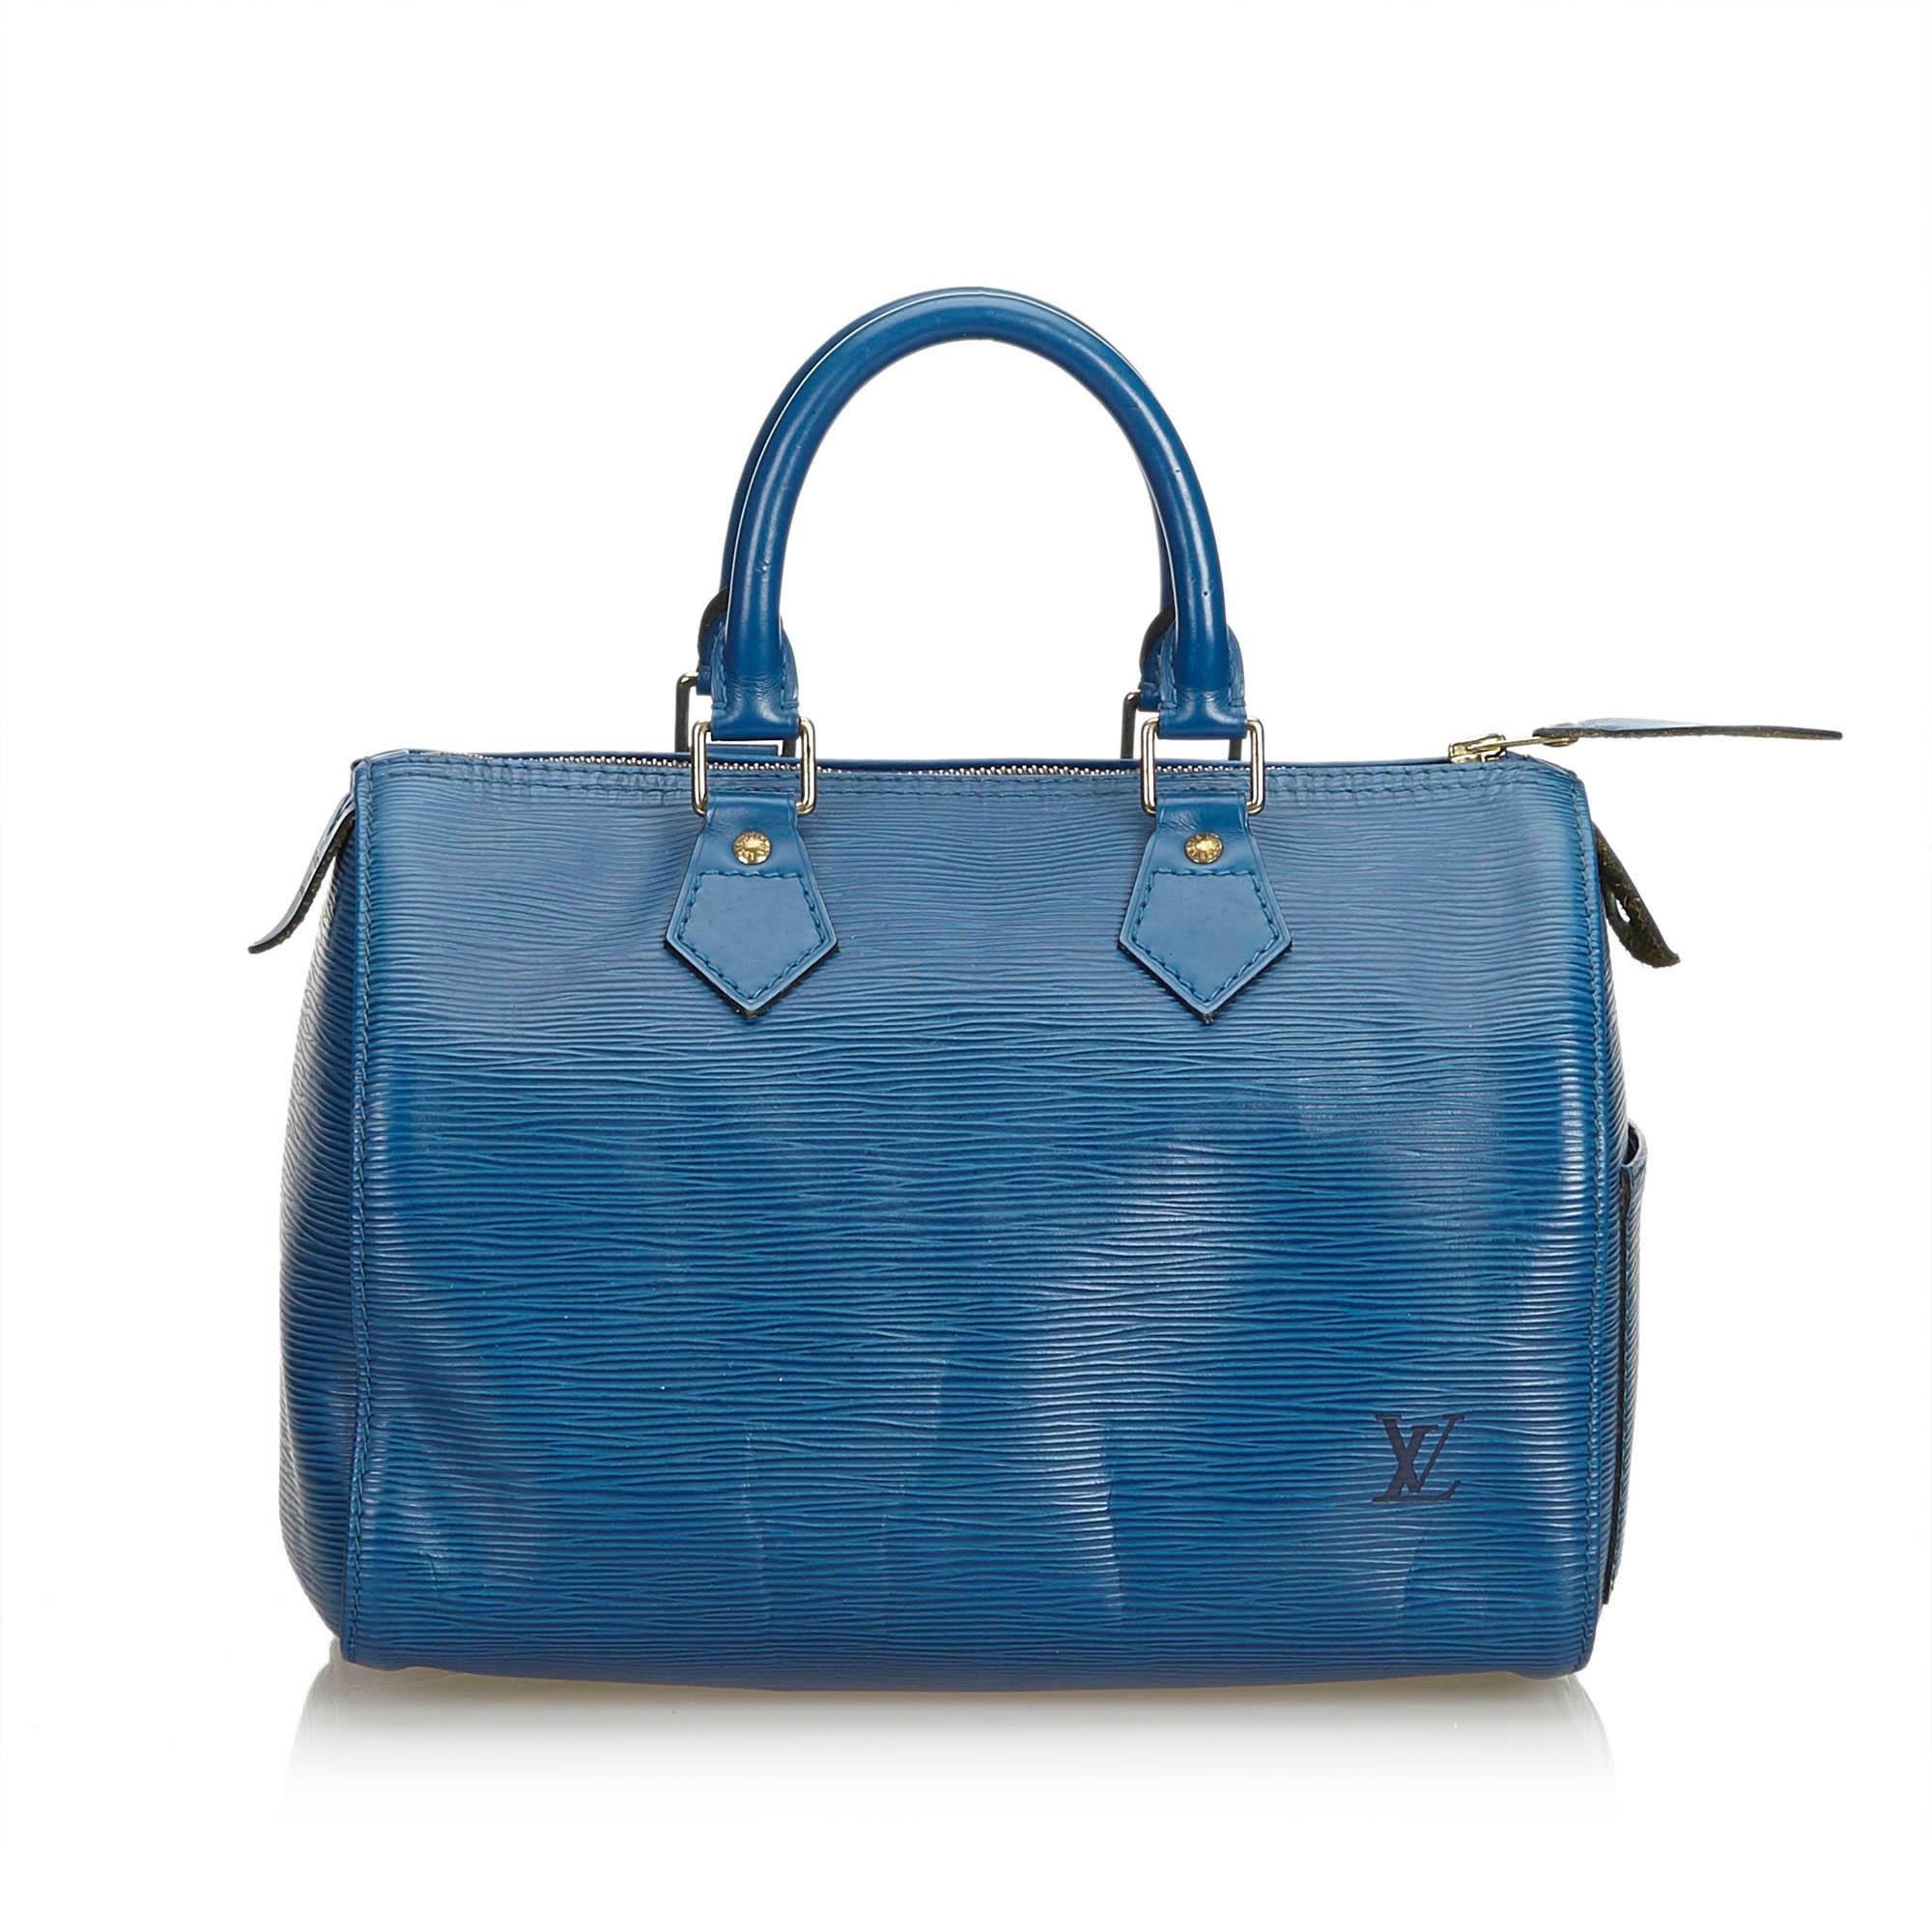 Louis Vuitton Blue Epi Leather Leather Epi Speedy 25 France In Good Condition For Sale In Orlando, FL